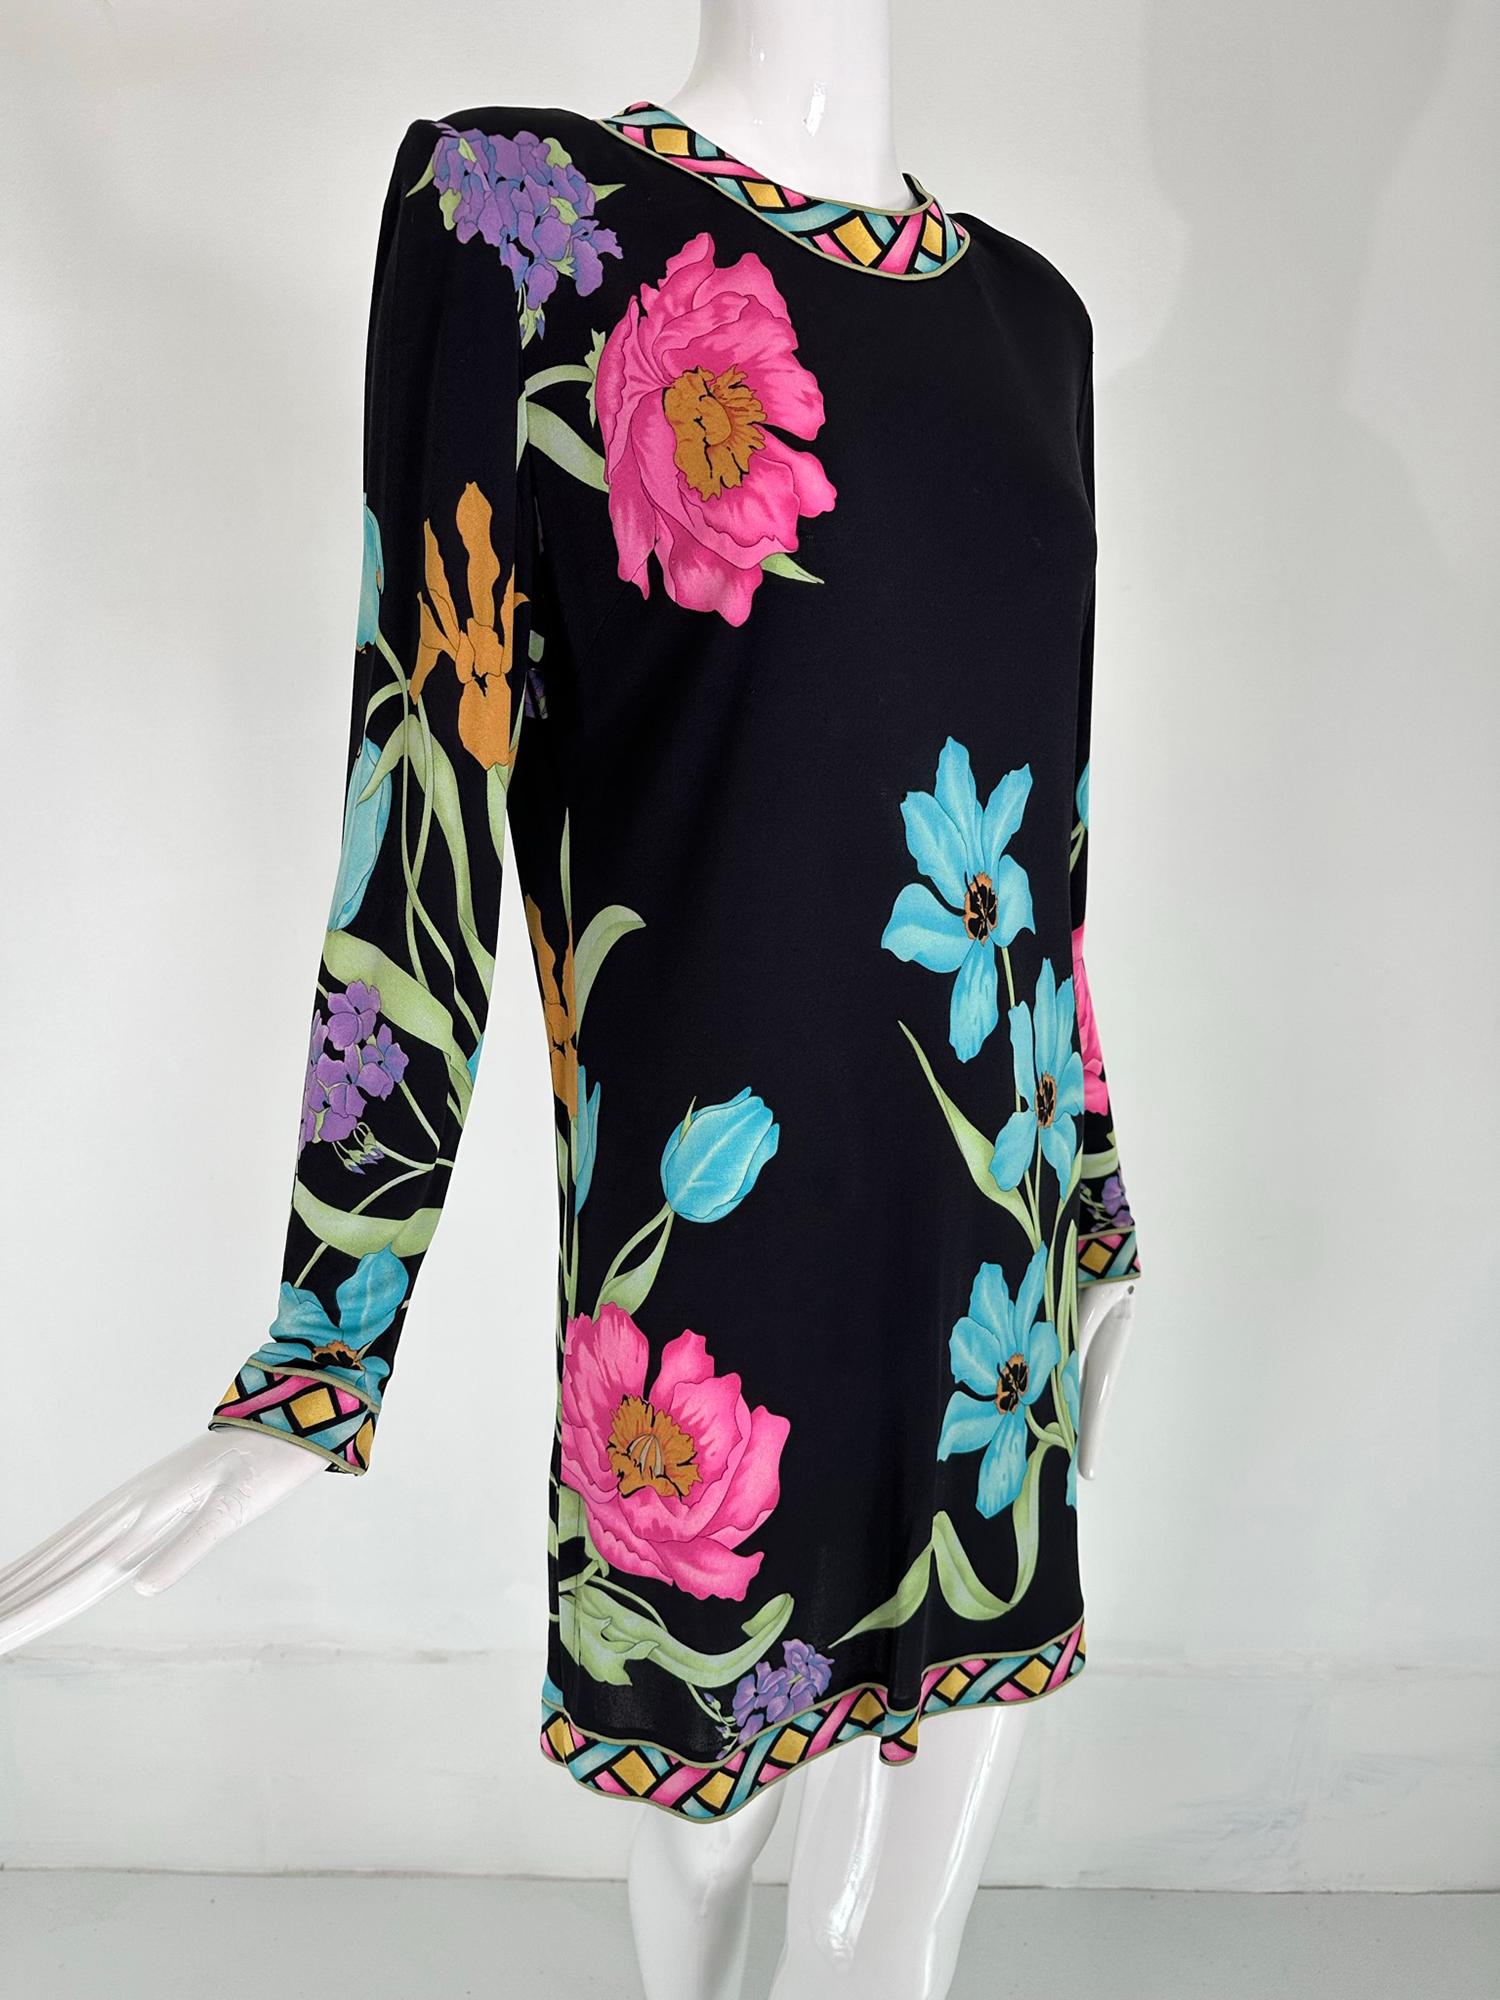 Averardo Bessi spectacular vibrant silk floral tunic dress US 12. From the 1990s this beautiful dress can be worn as a tunic or a mini dress. Banded print jewel neck dress with long sleeves. The dress has side bust darts and a slight A line shape